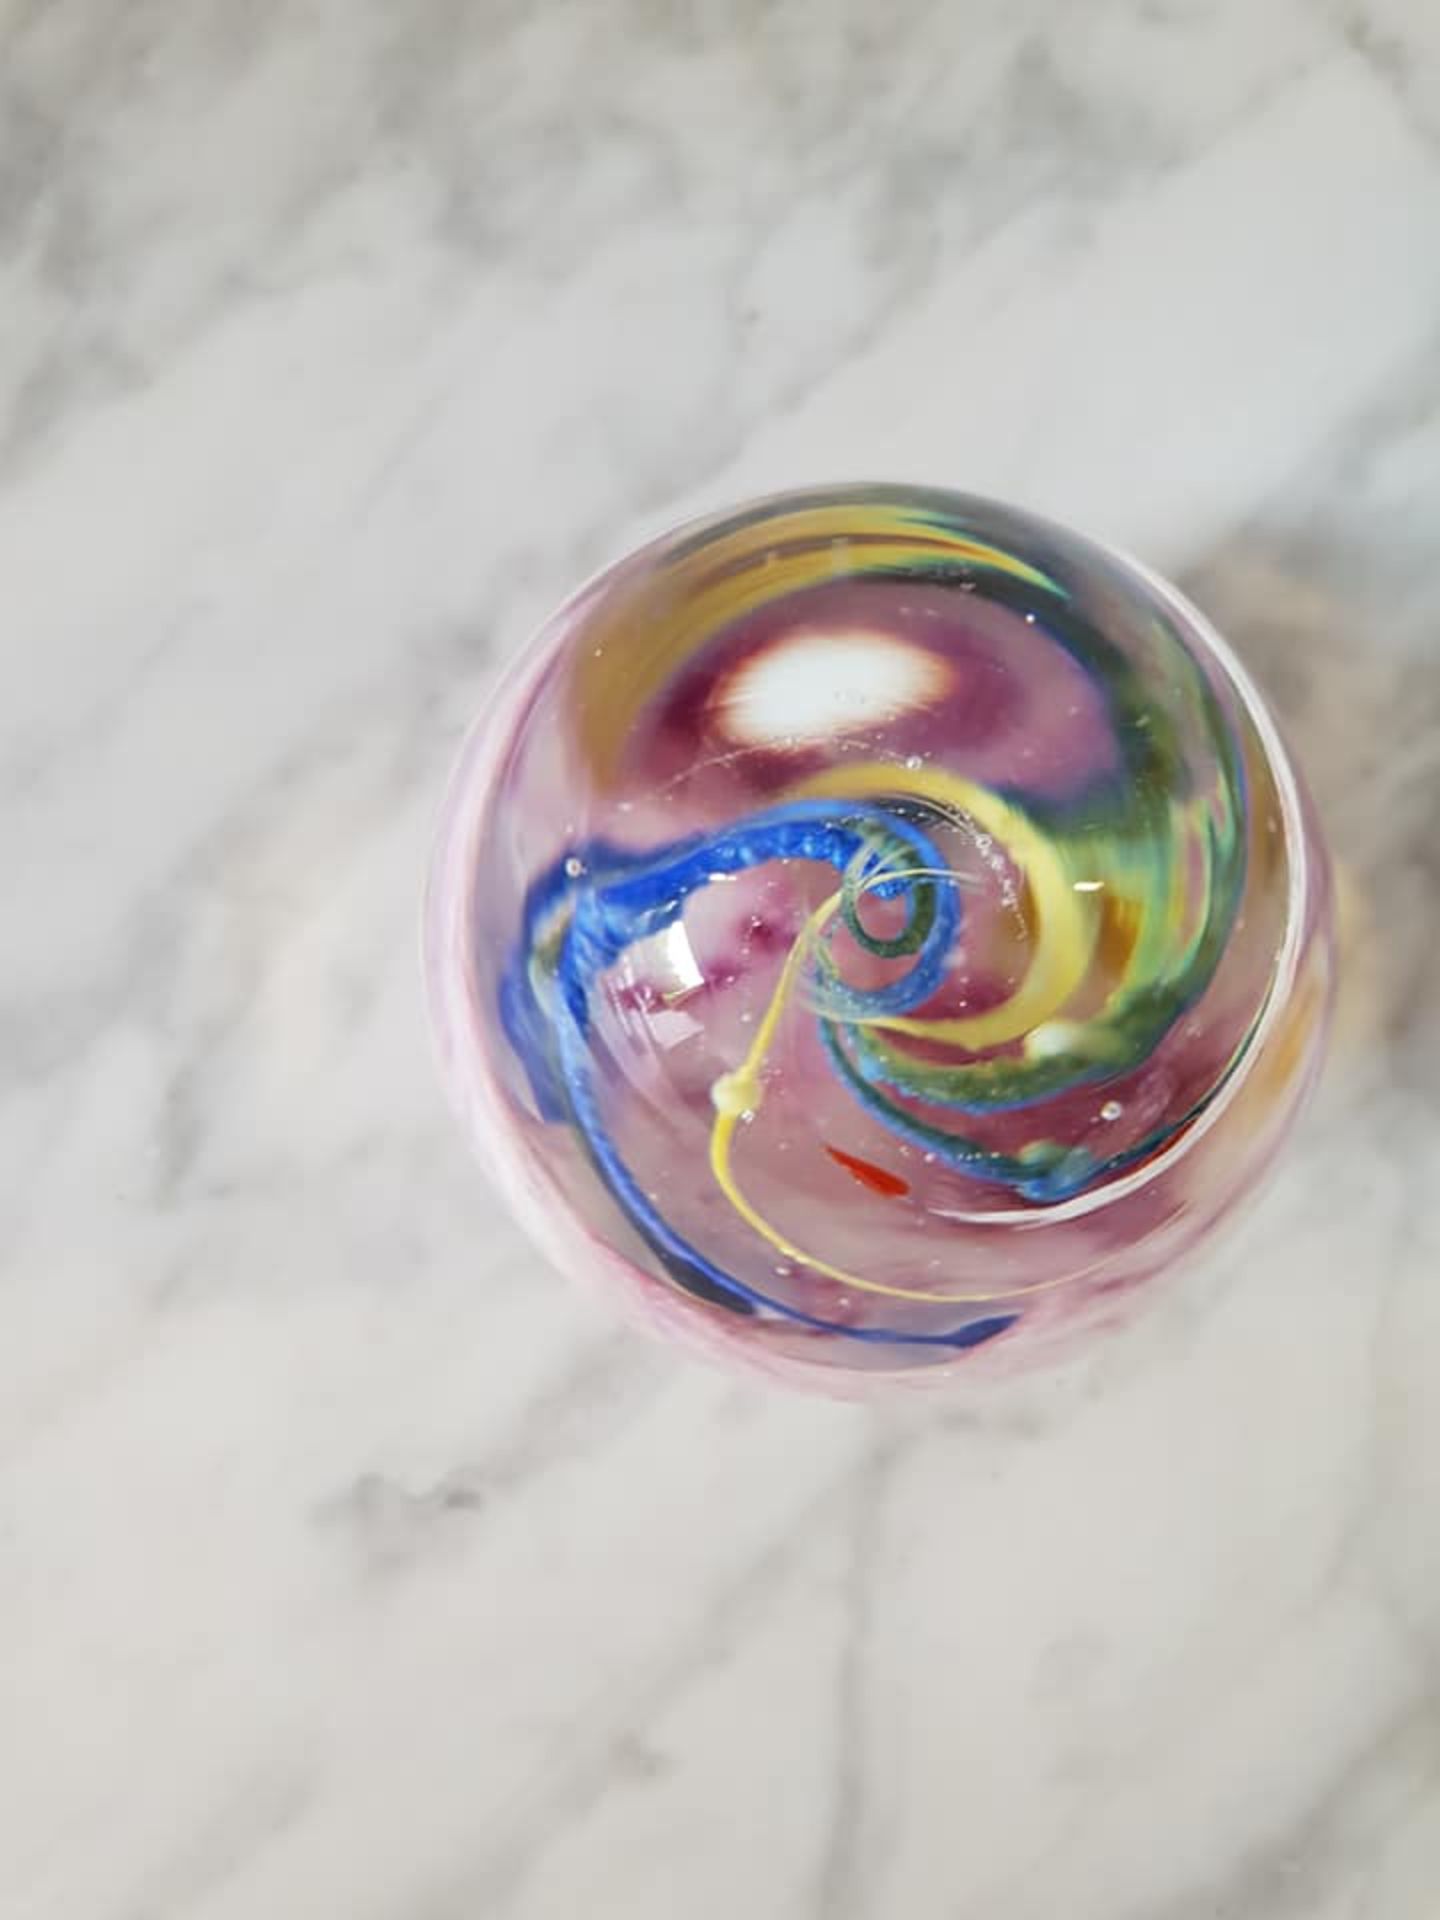 Bohemian blown art glass ovoid paperweight 9cm swirls of pink and white with blue and yellow bands - Image 2 of 2